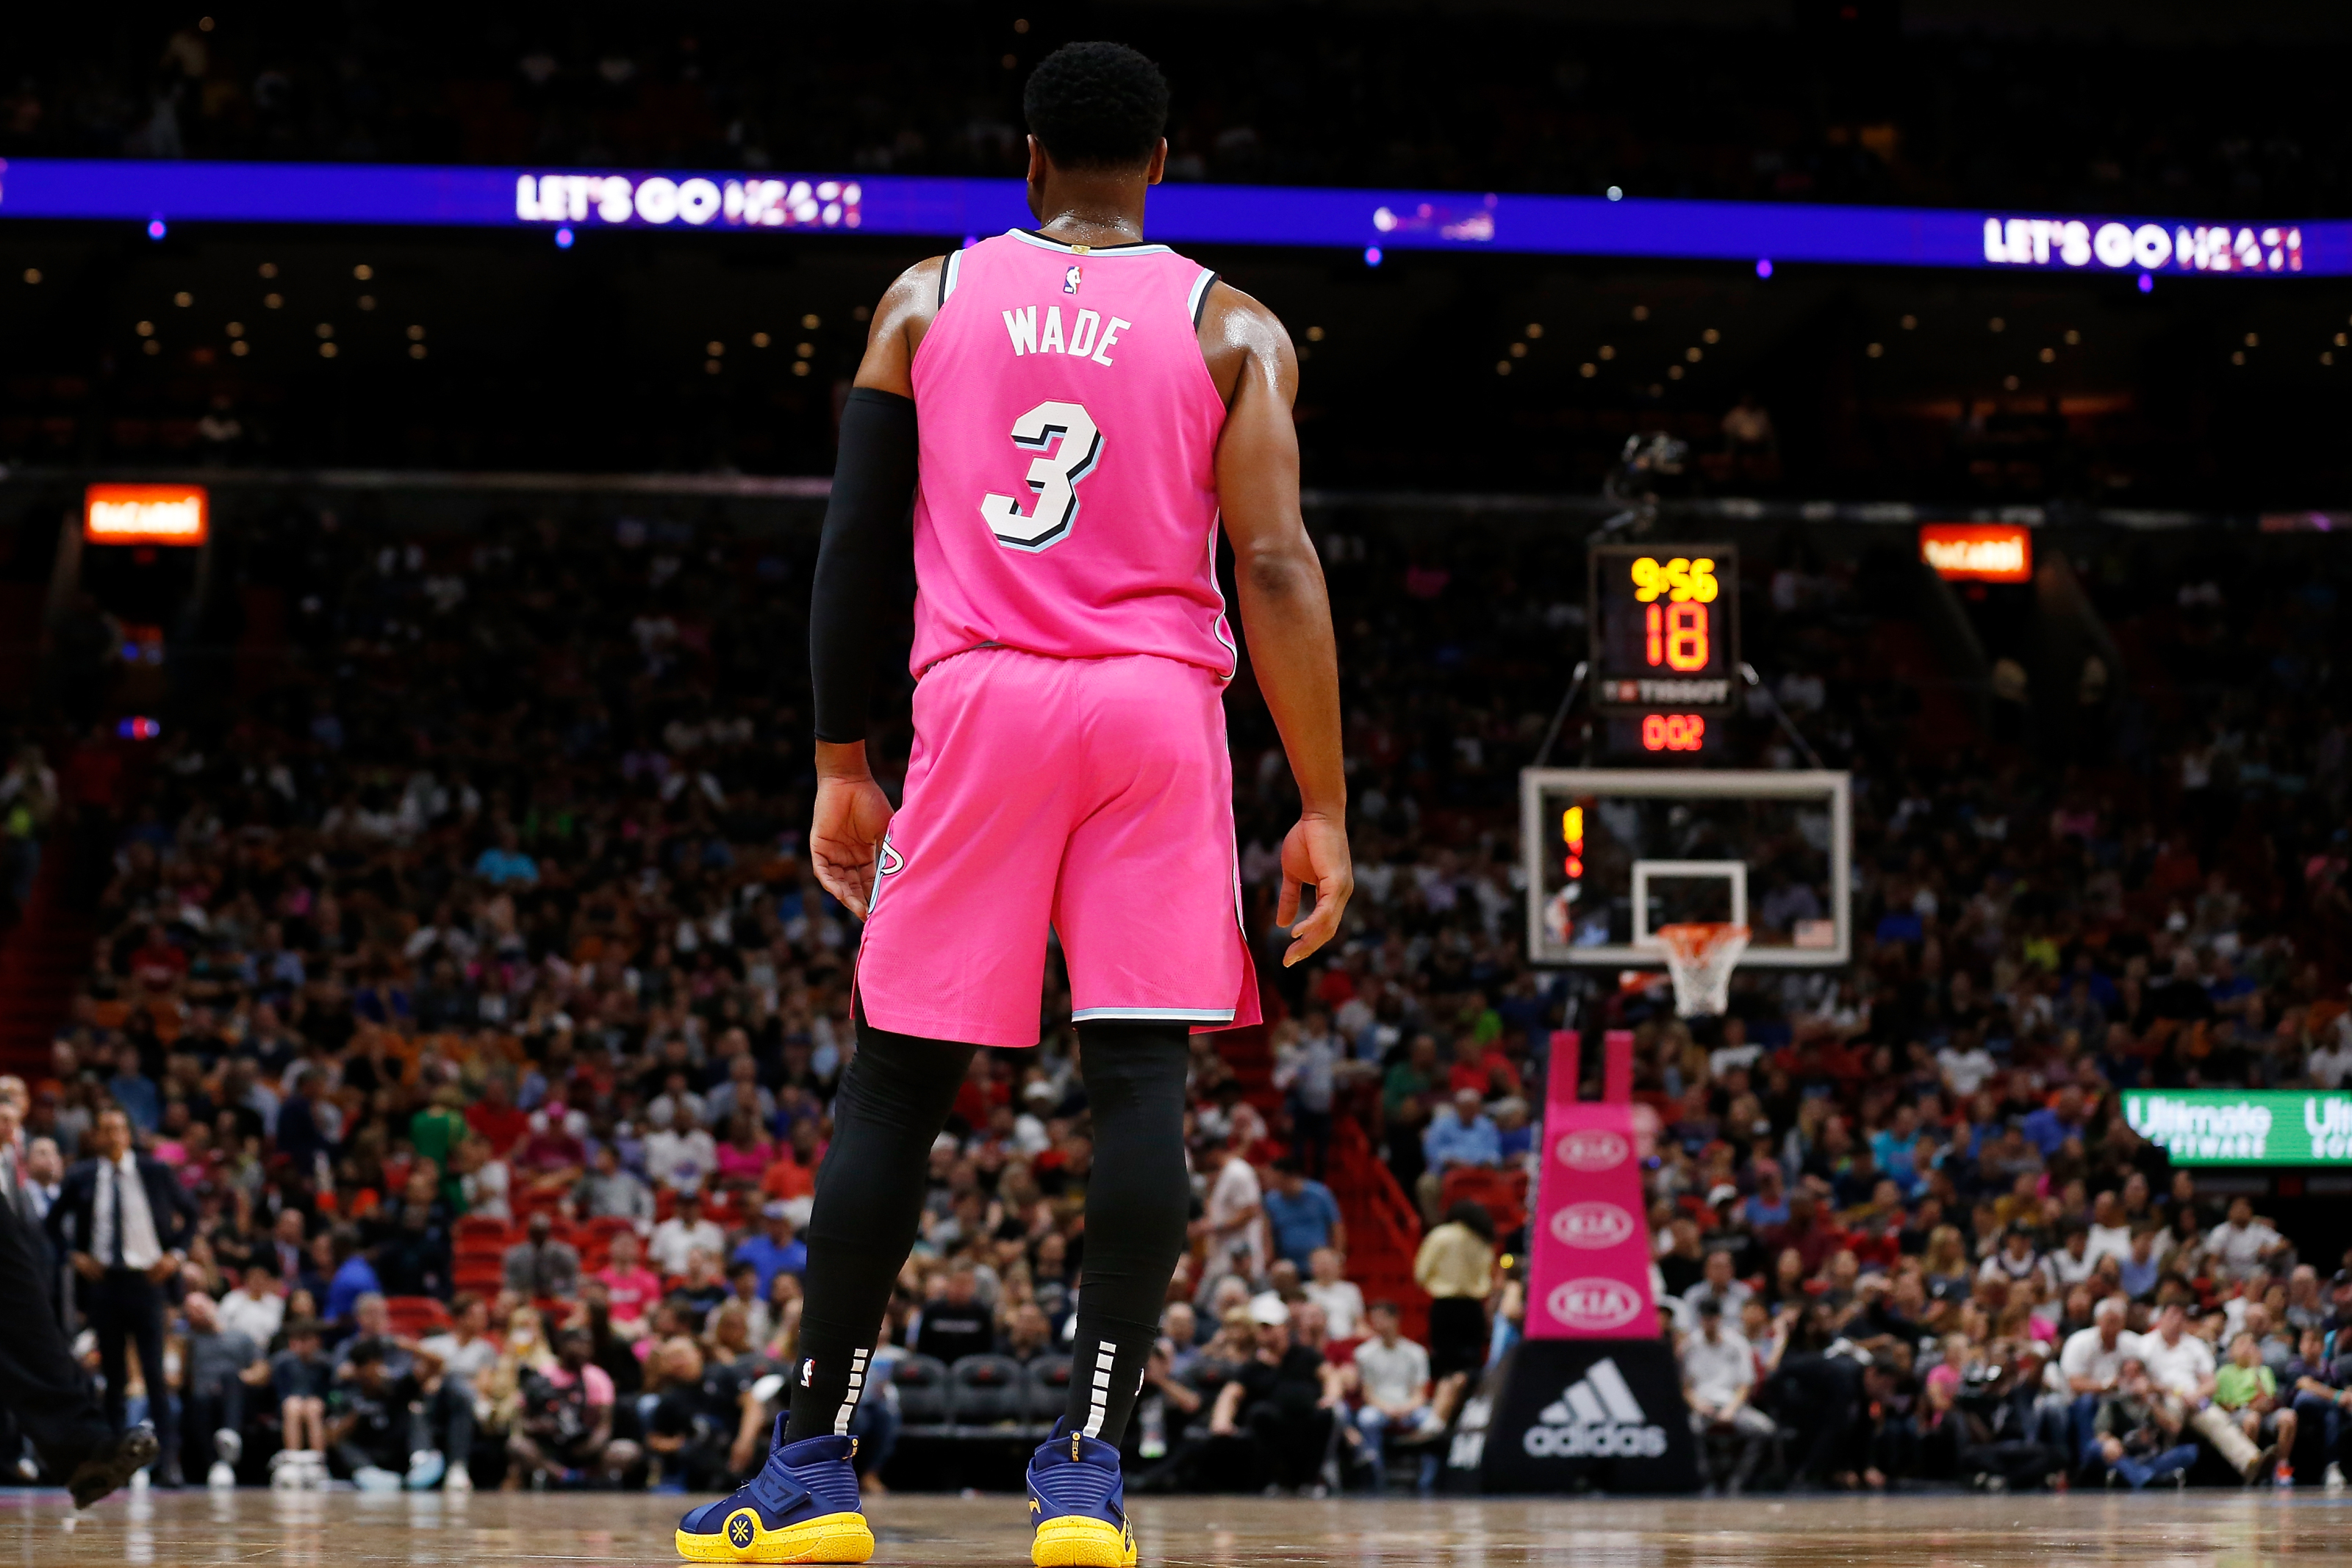 LOOK: Are these the Miami Heat's new 'Vice' jerseys for the 2019